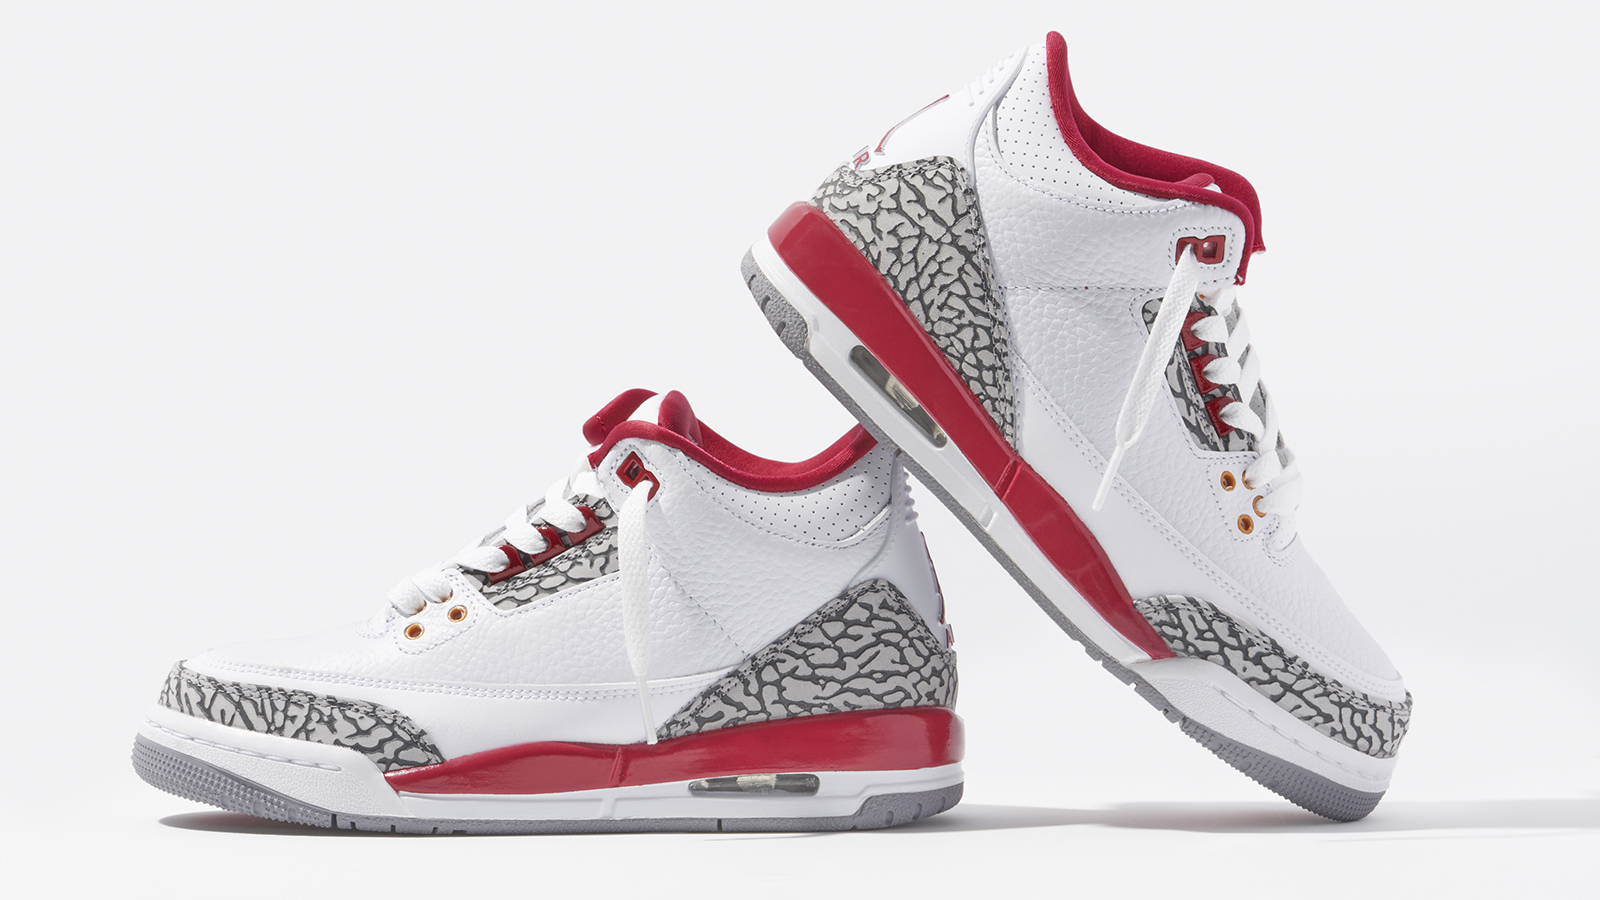 <strong>The Best Jordan ‘Cement’ Sneakers</strong>